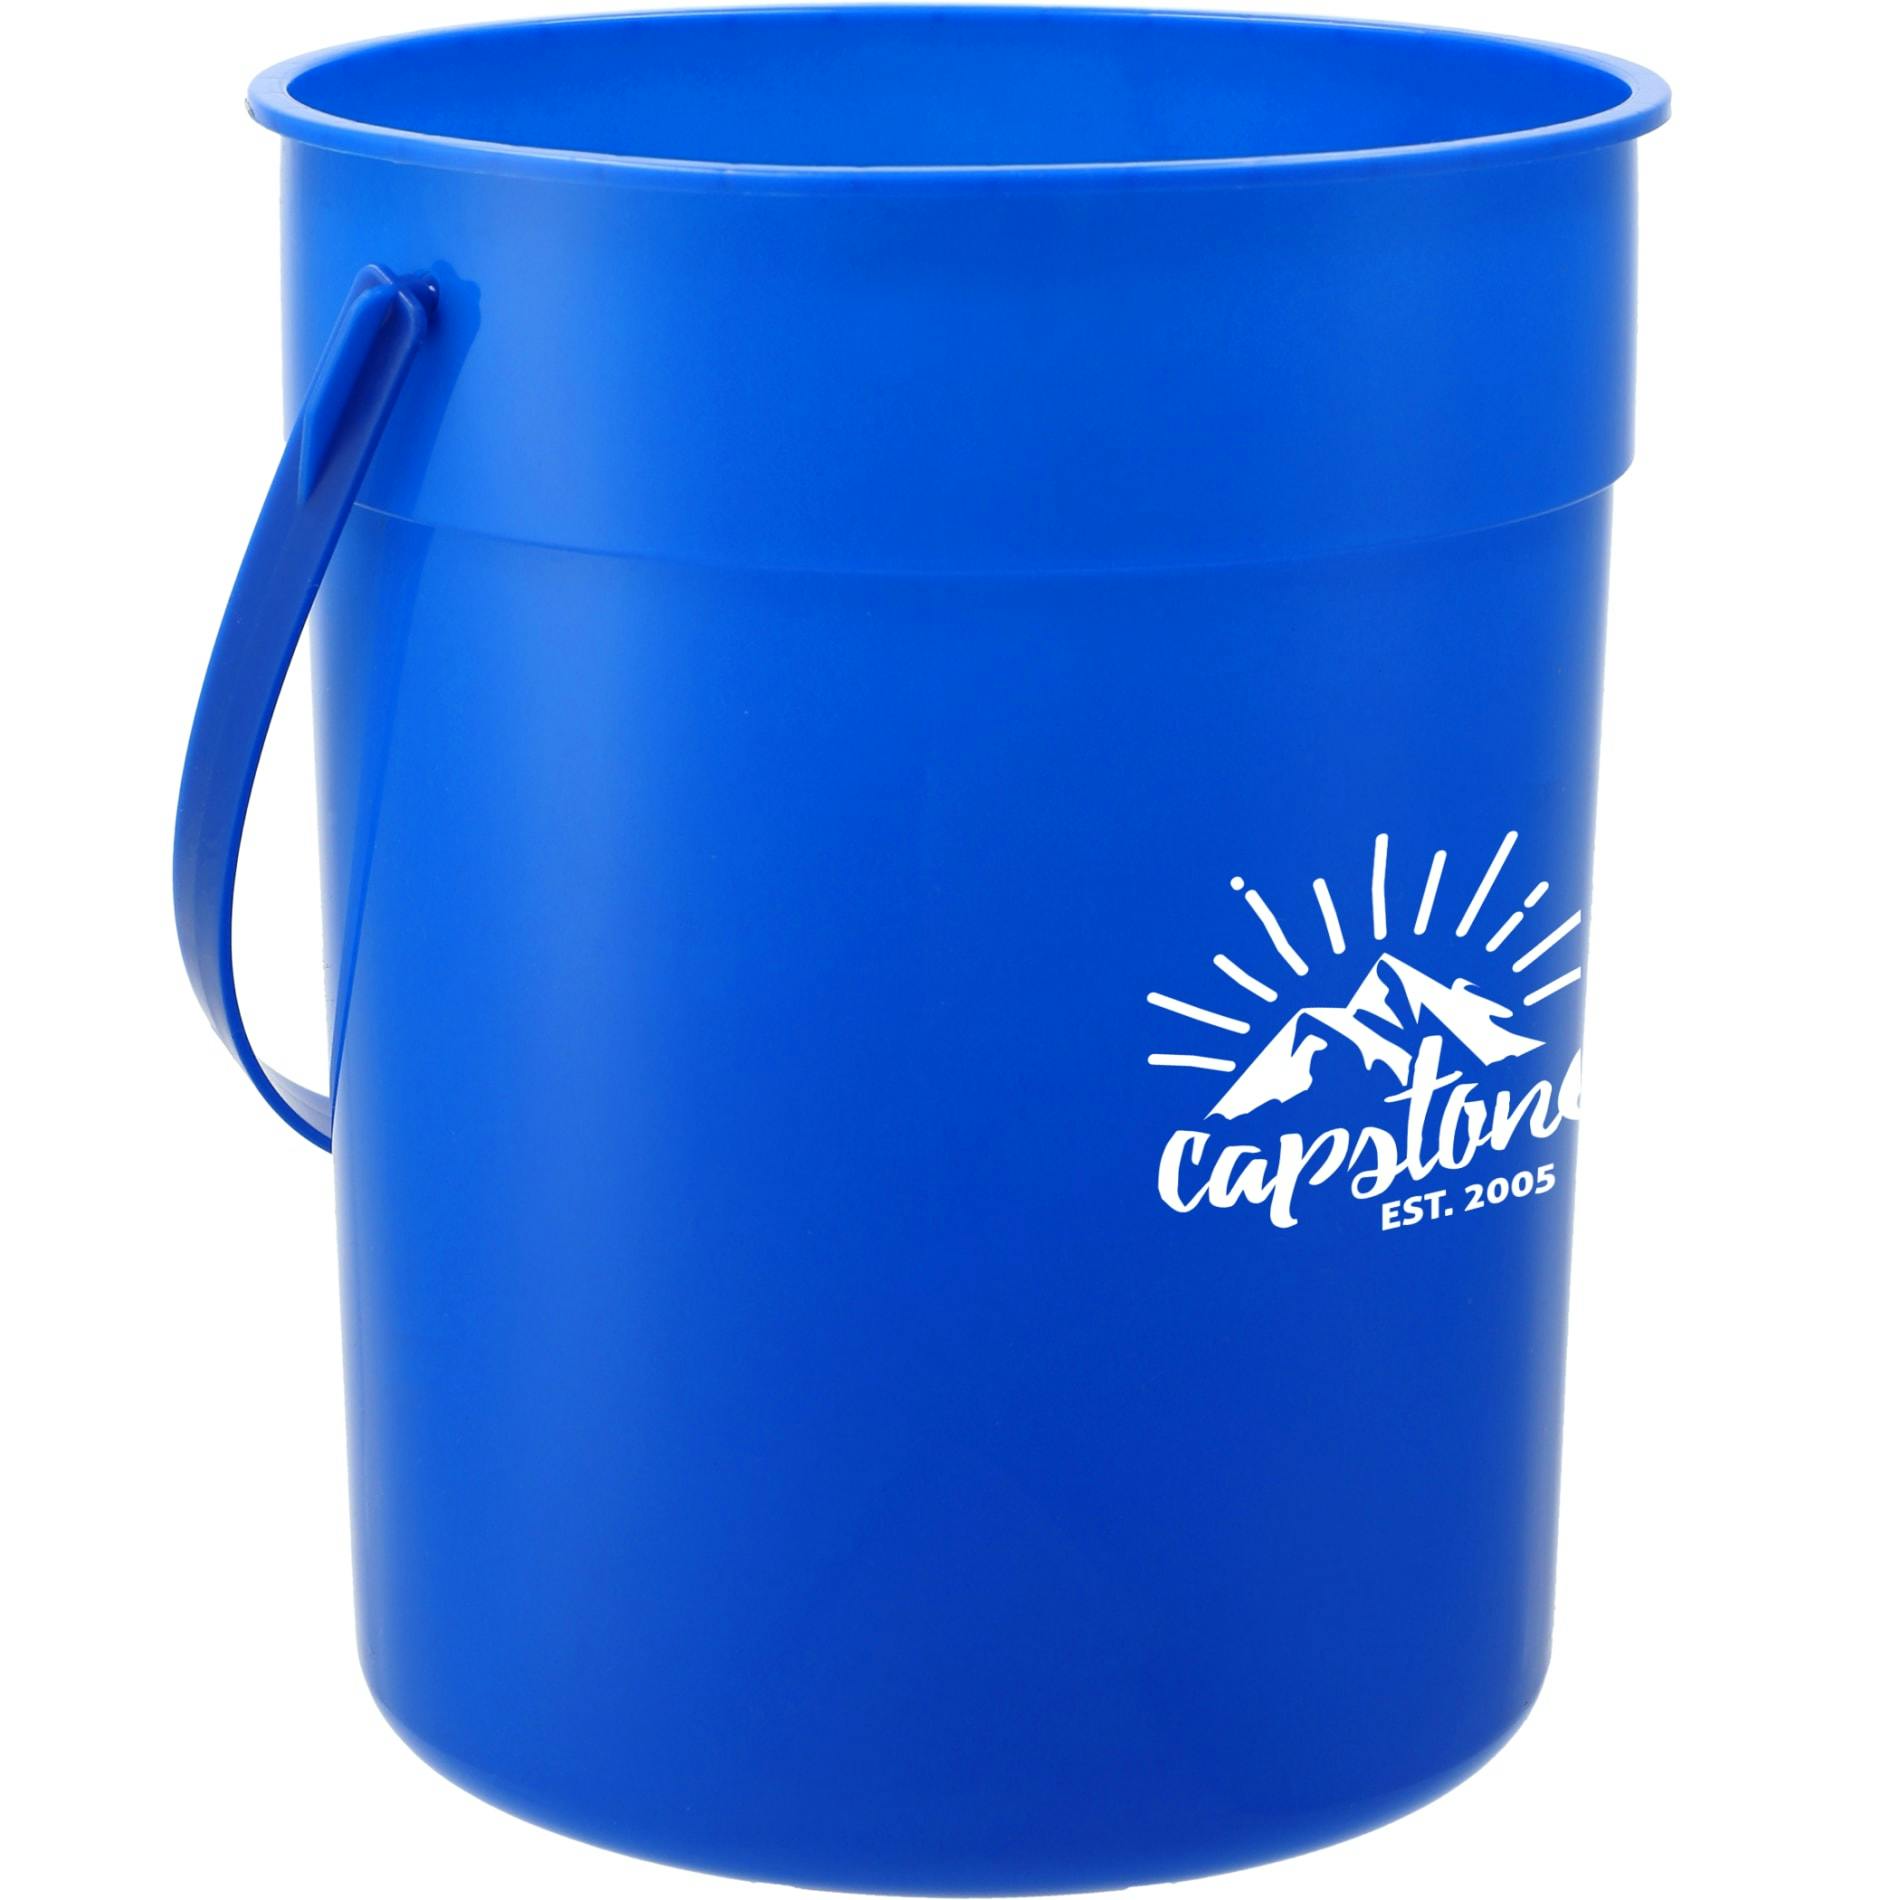 87oz Pail with Handle - additional Image 1